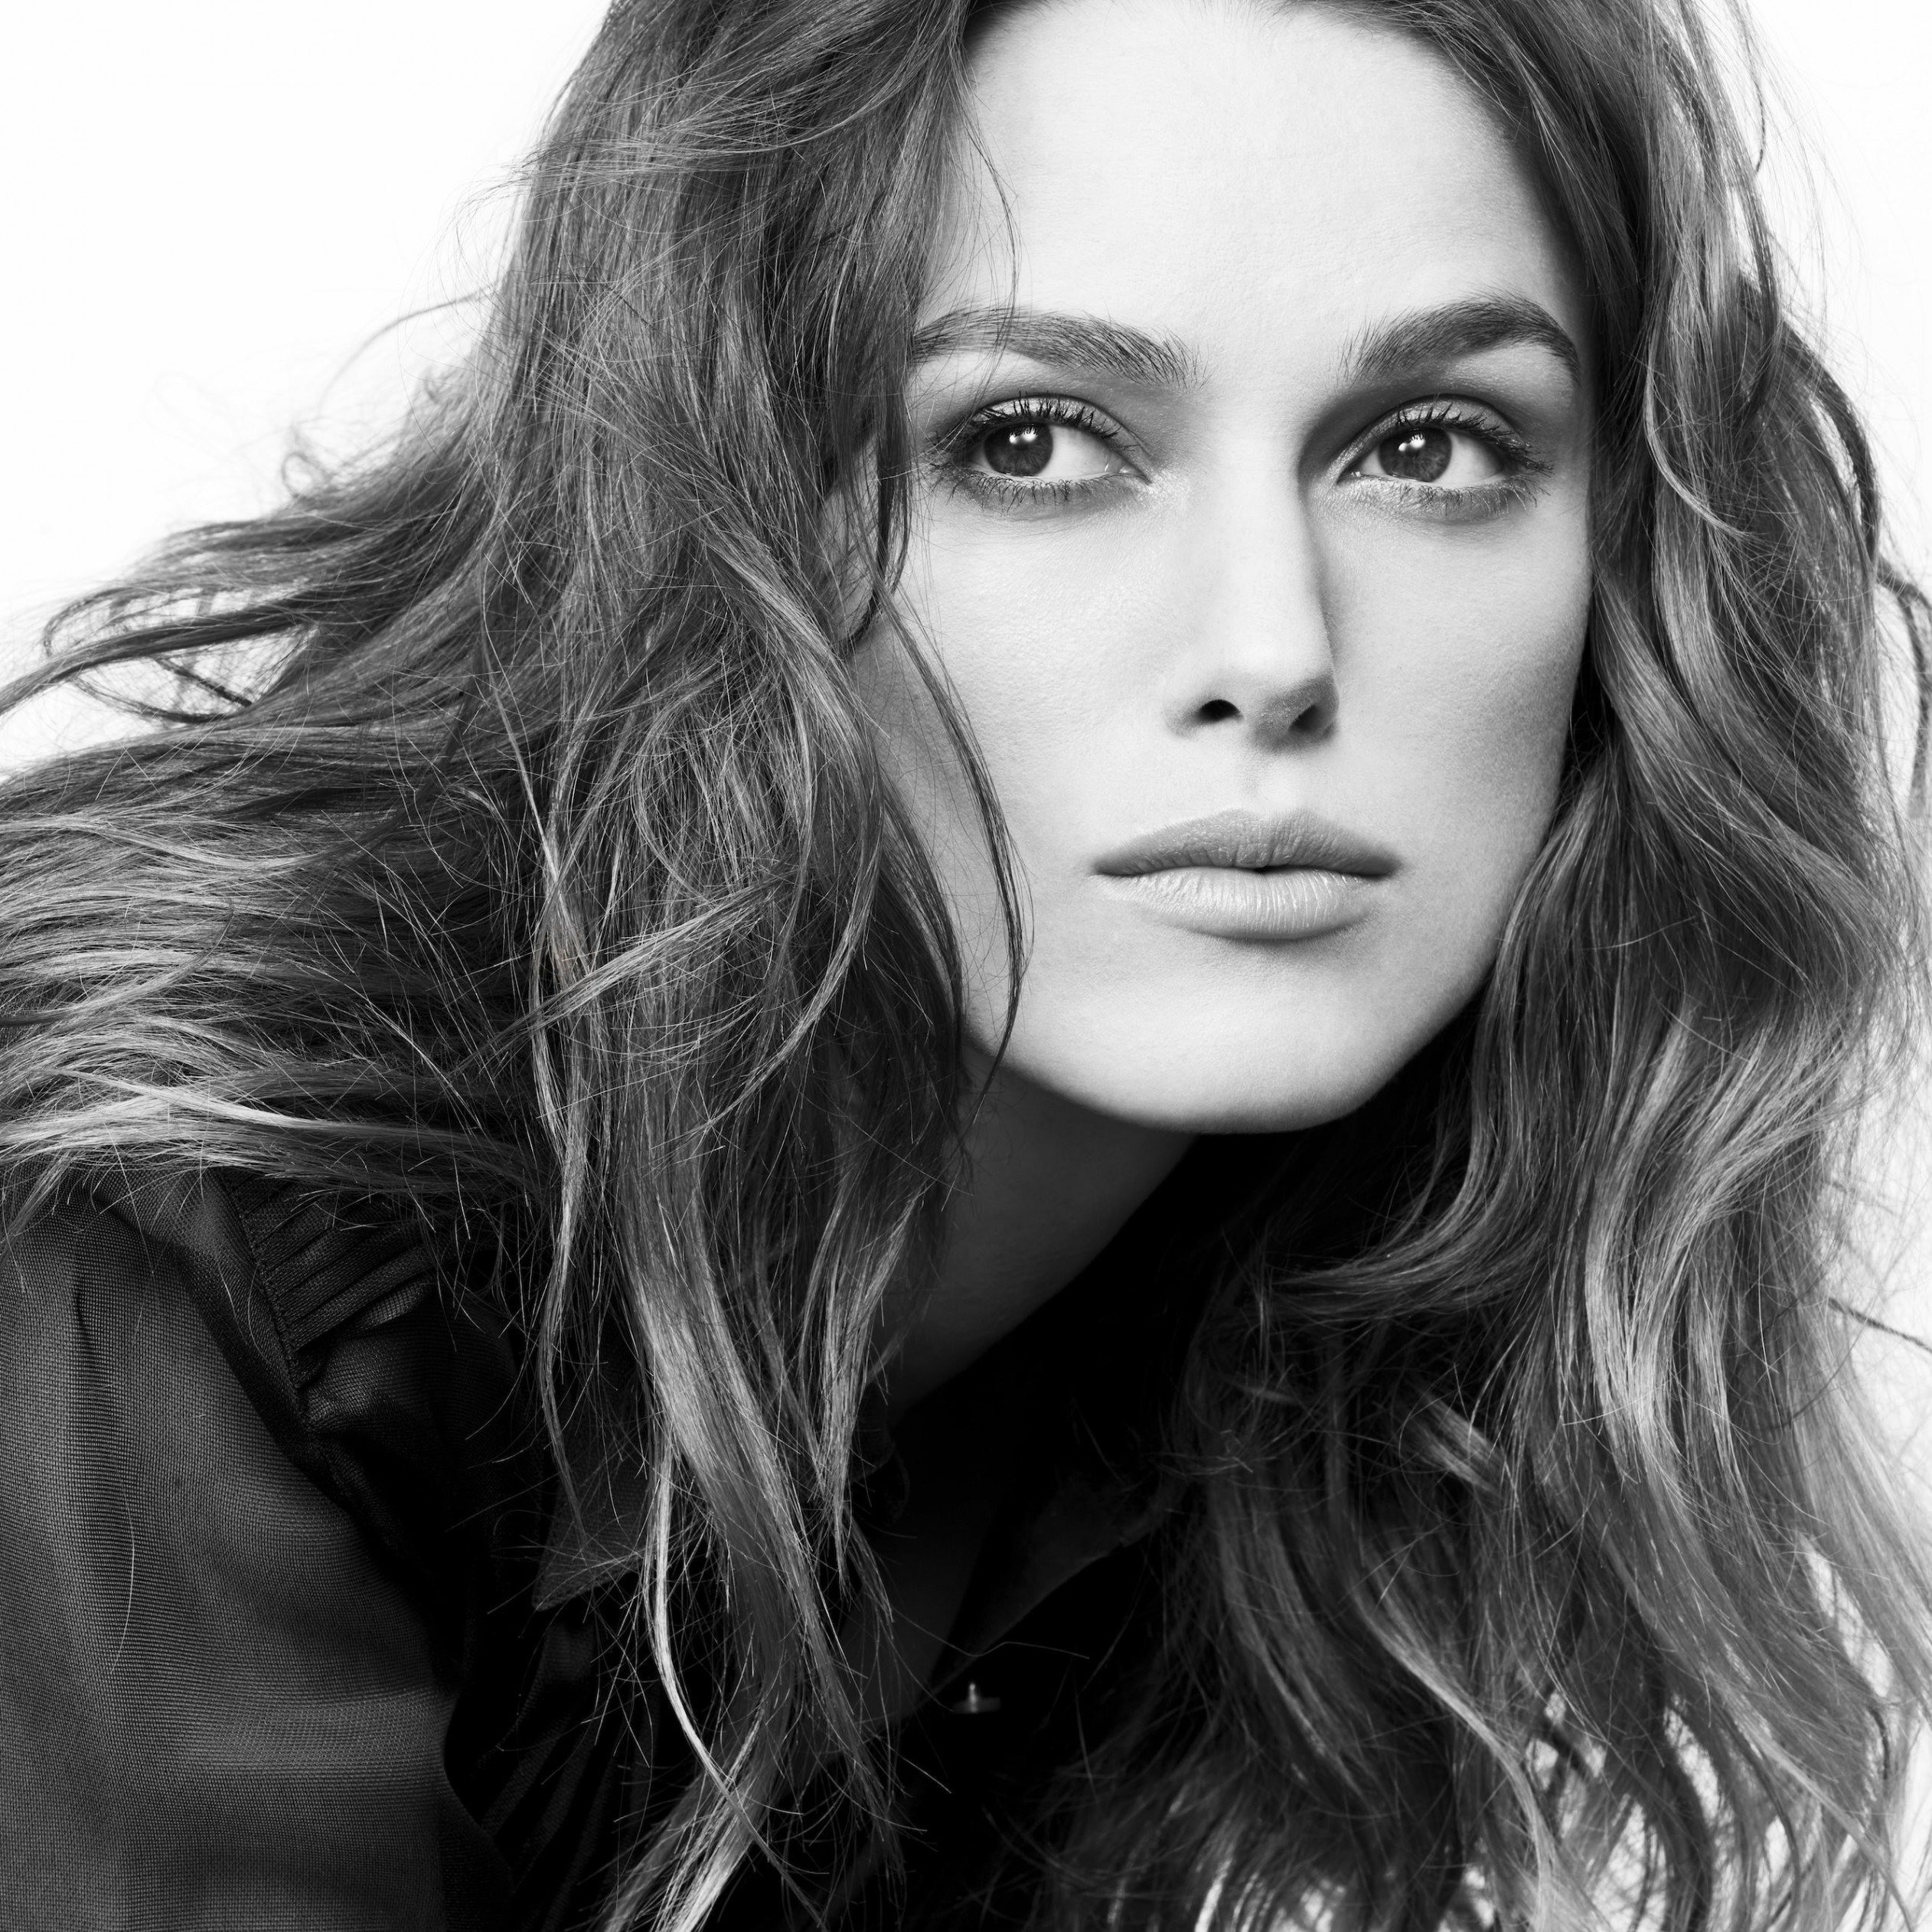 Keira Knightley in Black & White Wallpaper for Apple iPad Air